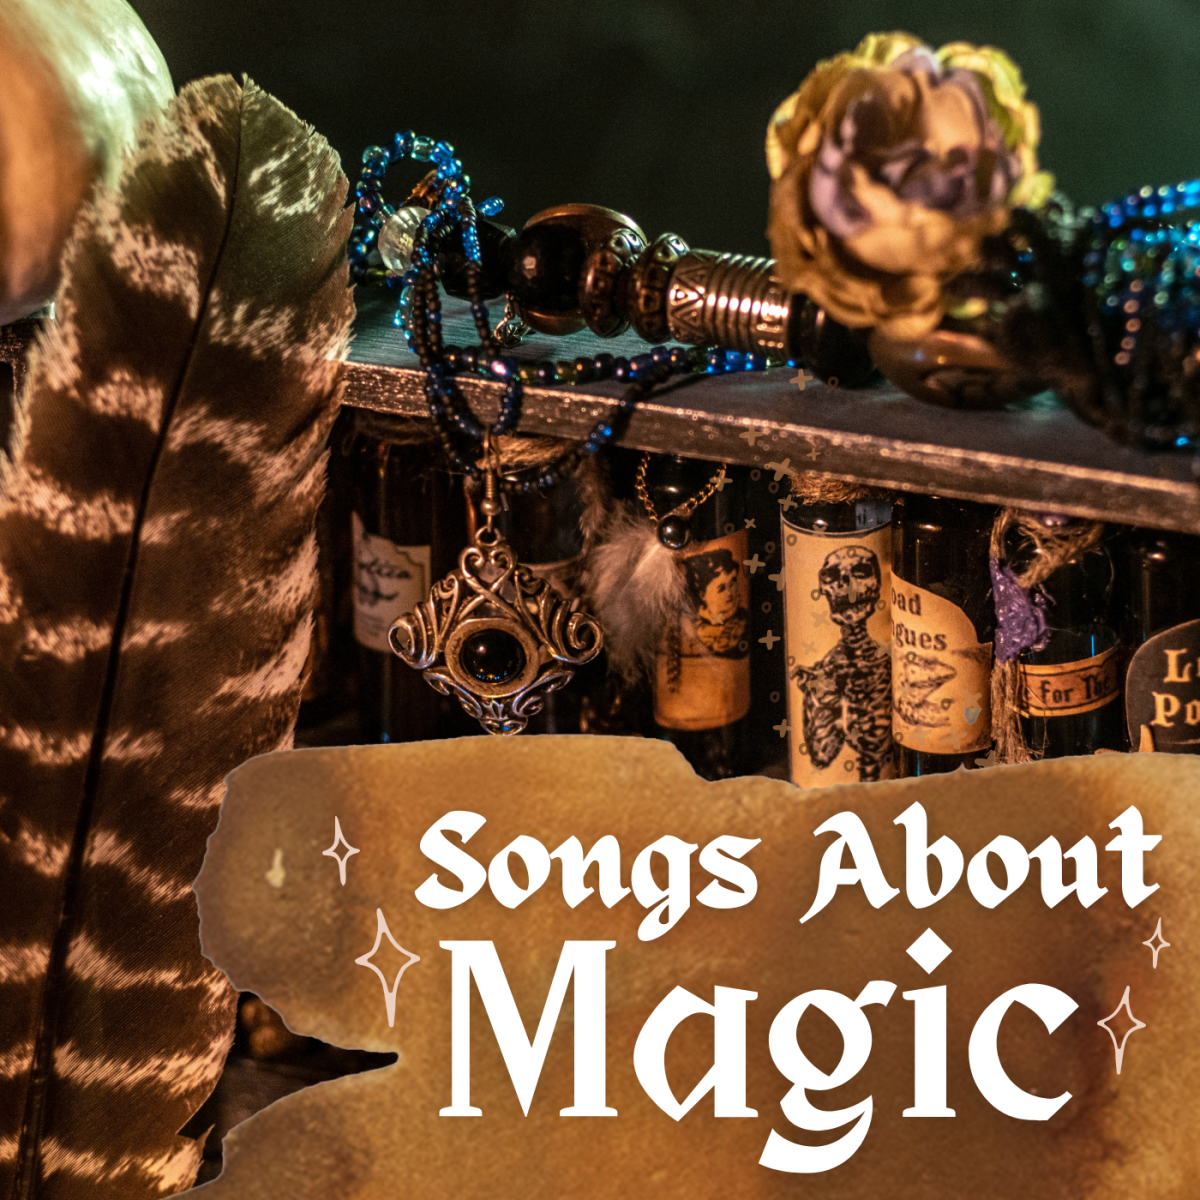 Love is magic. So are nature, children, music, and art. The whole world is filled with magic if your heart is open to the possibility. Make a little magic with these songs!